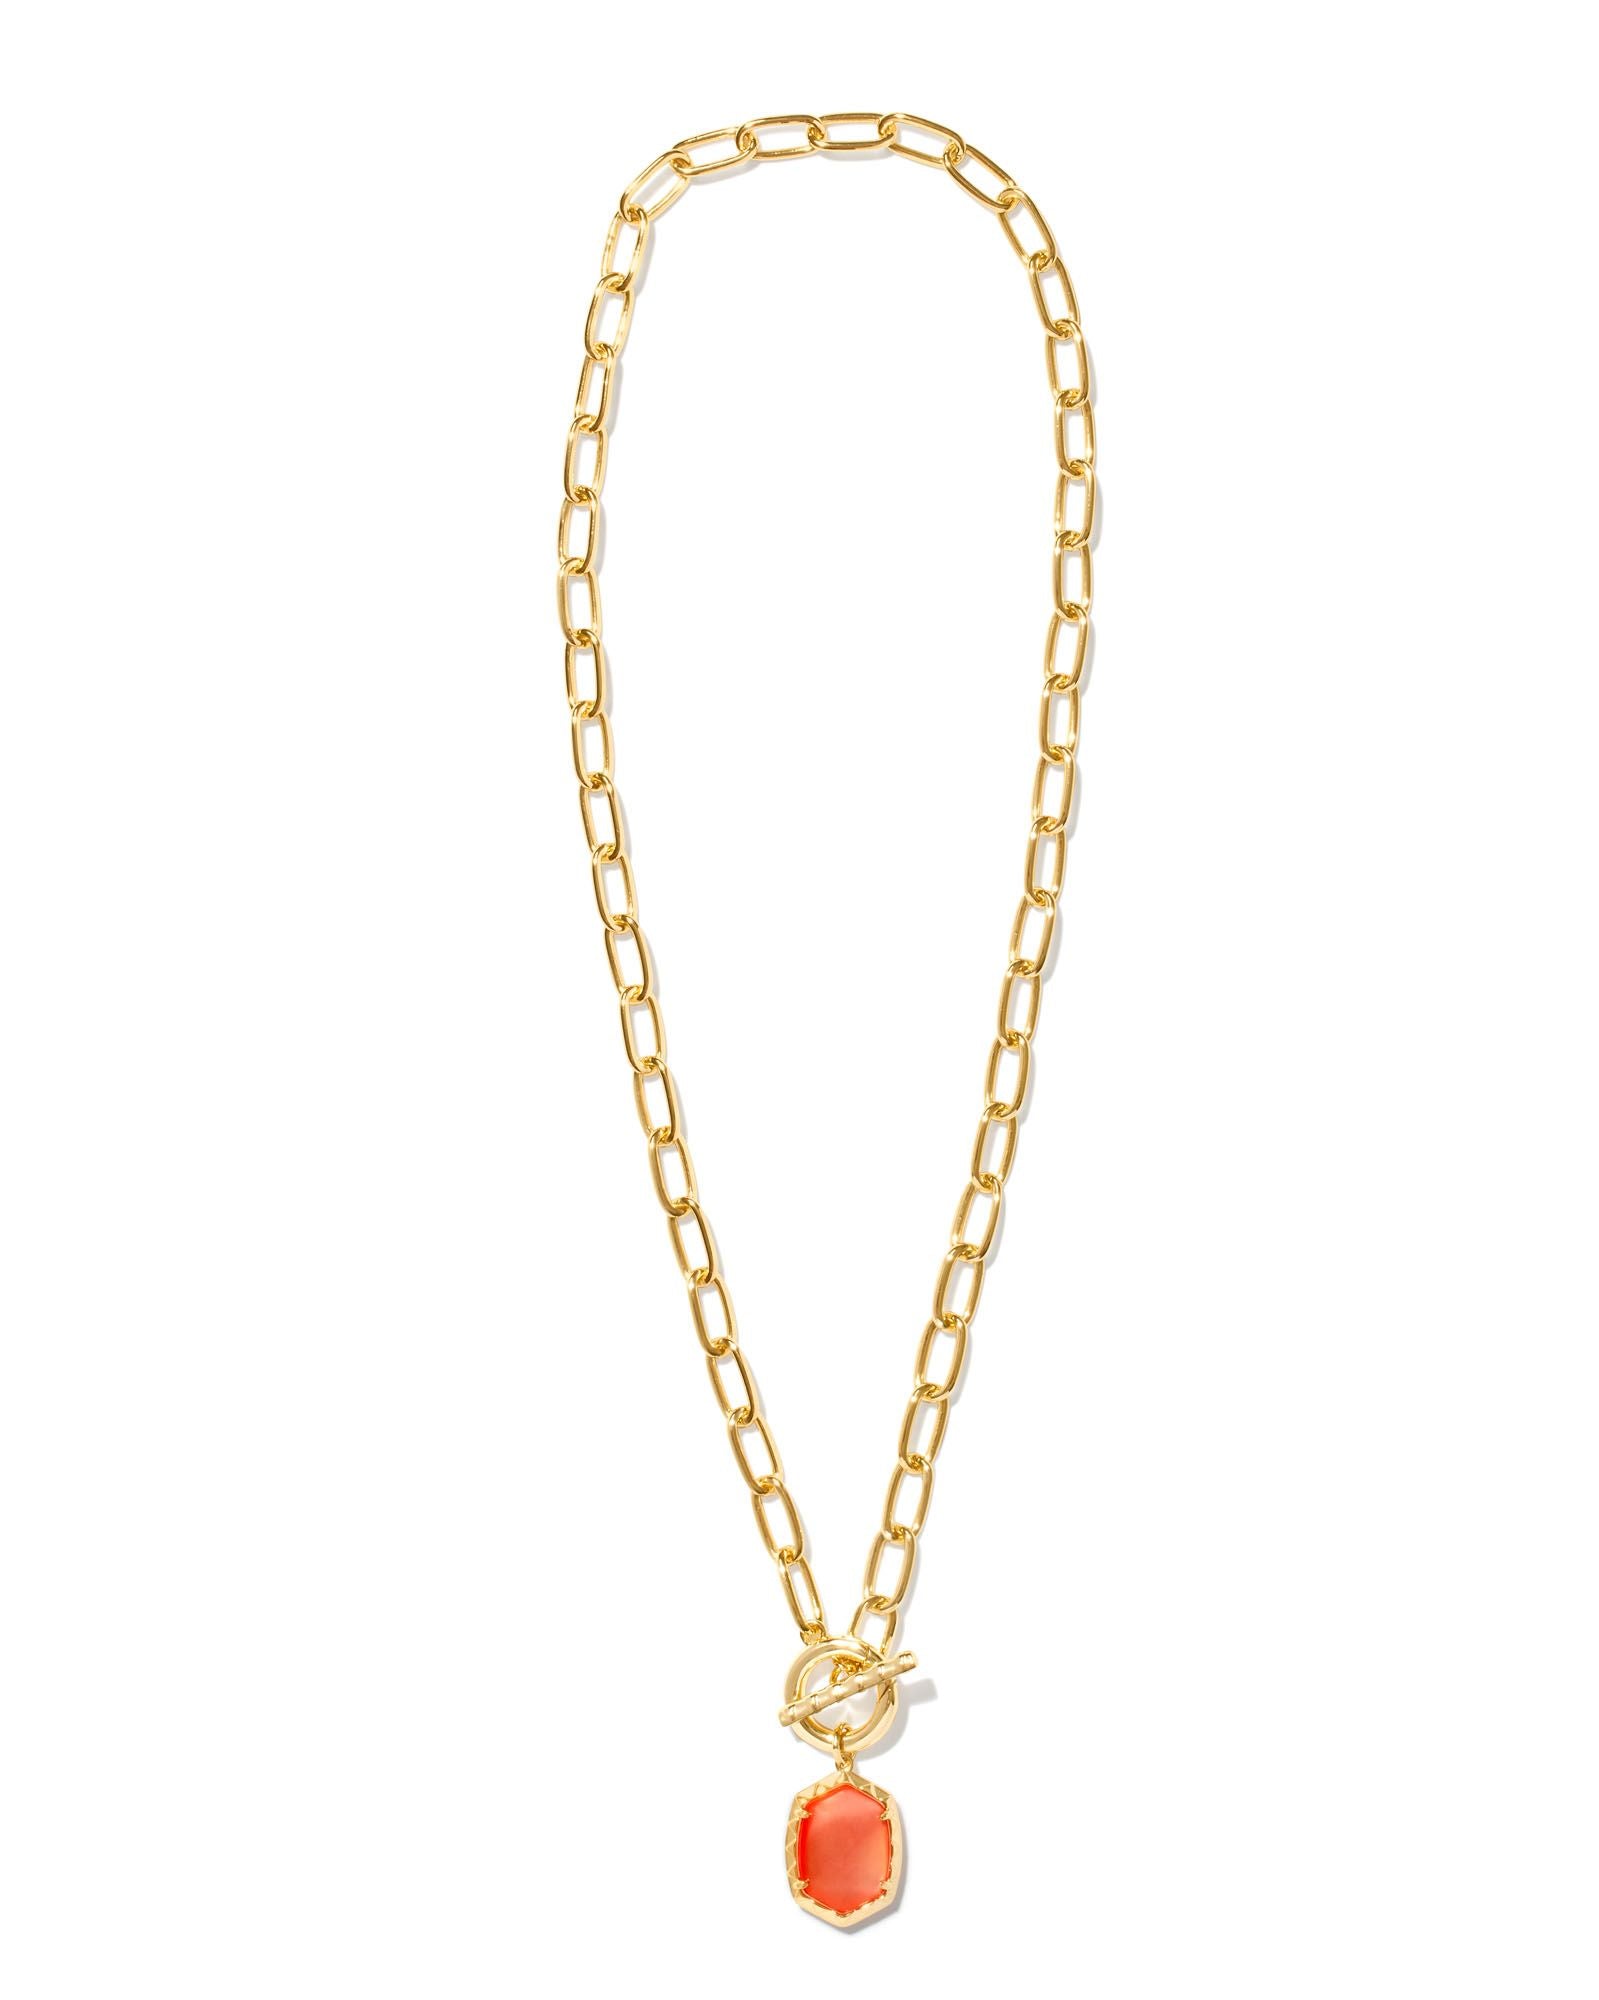 Daphne Gold Link and Chain Necklace Coral Pink MOP